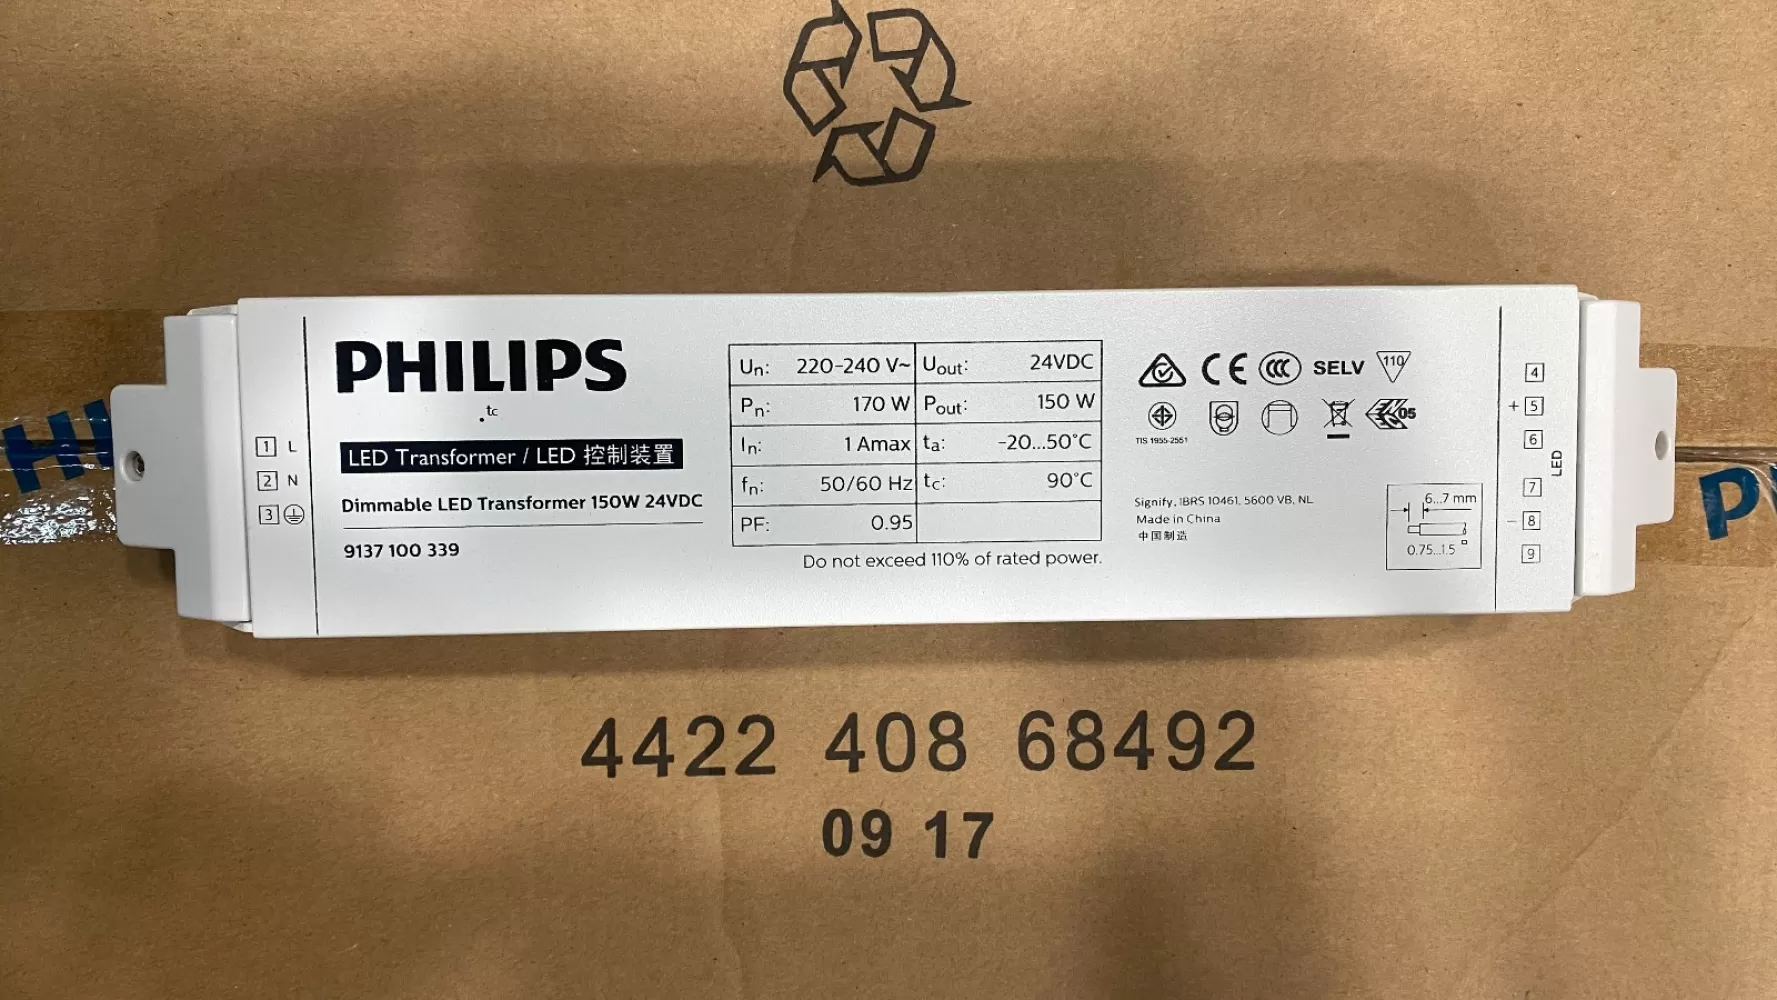 PHILIPS 150W 24VDC 220-240V PHASE CUT DIMMABLE LED TRANSFORMER/DRIVER SUITABLE FOR SED-EU200A AND LED STRIP 9137100339 